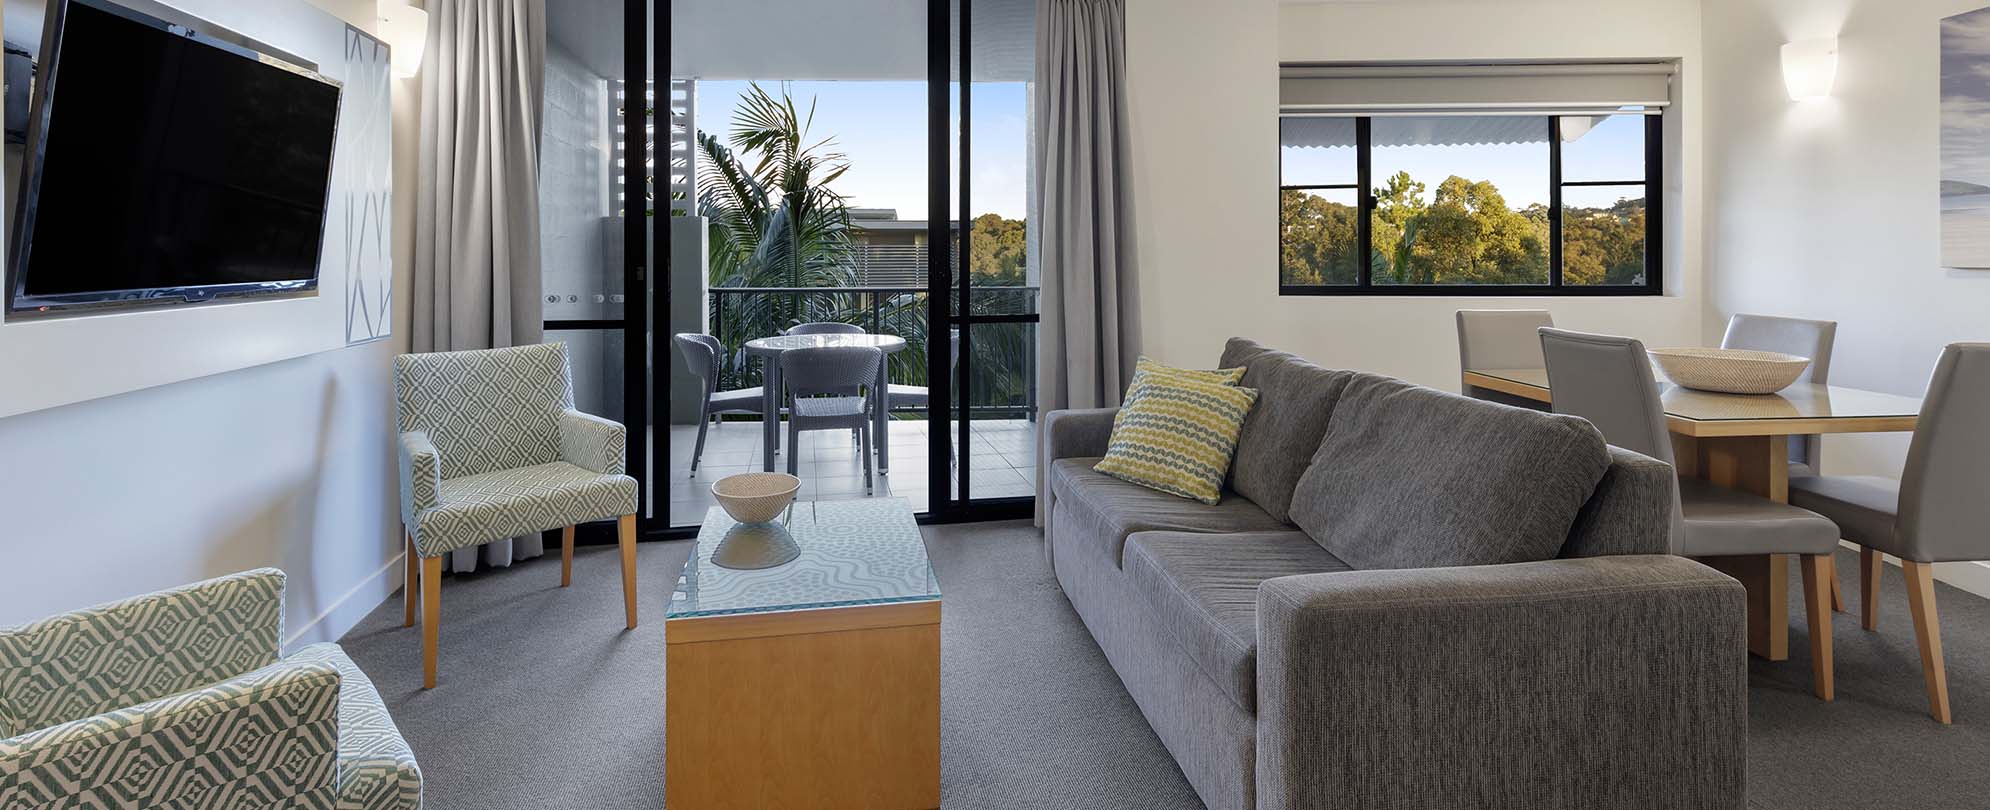 The living and dining area in a 1-bedroom suite at Club Wyndham Coffs Harbor.